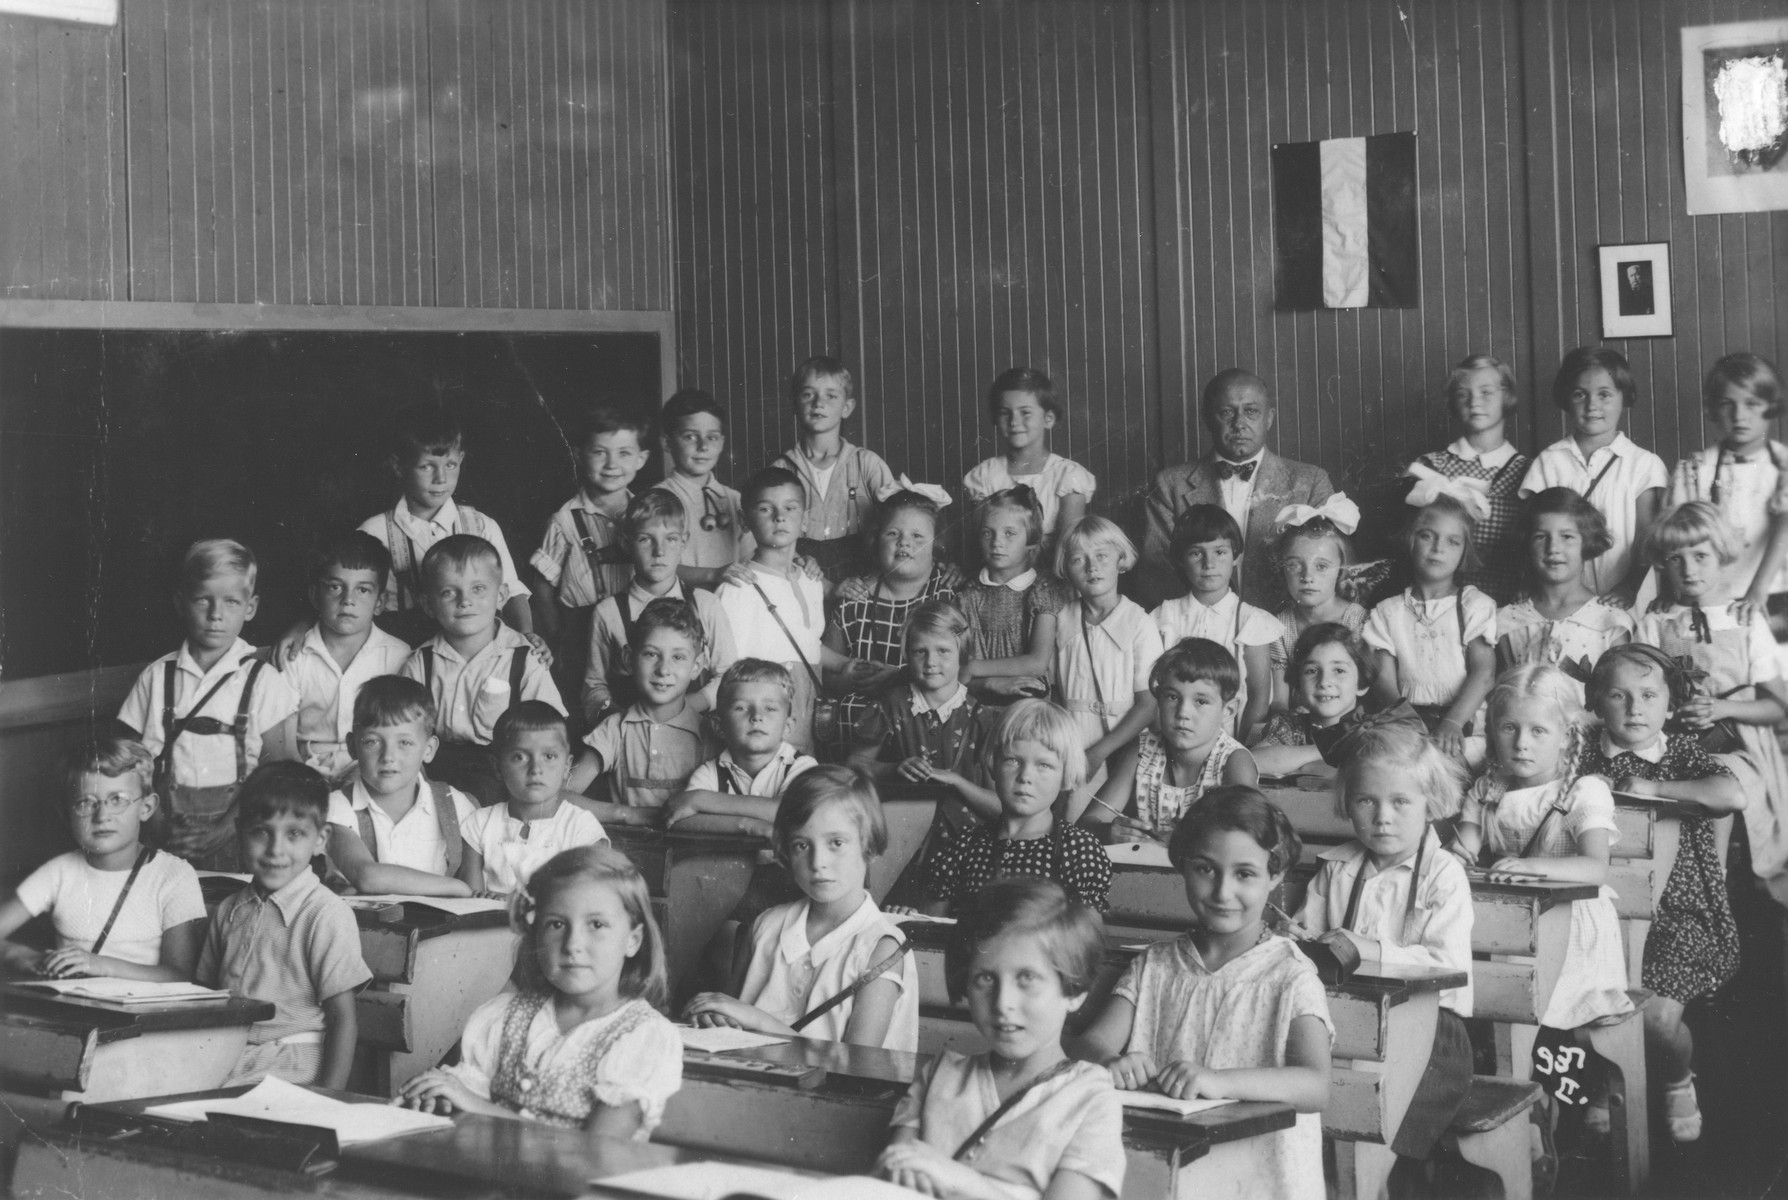 Children sit at their desks in a school in the Templehof neighborhood of Berlin.

Among those pictured is Paul Oppenheimer (third row, second from the left), the only Jewish child in the school.  A portrait of Hitler hanging on the wall was later rubbed out by the donor.